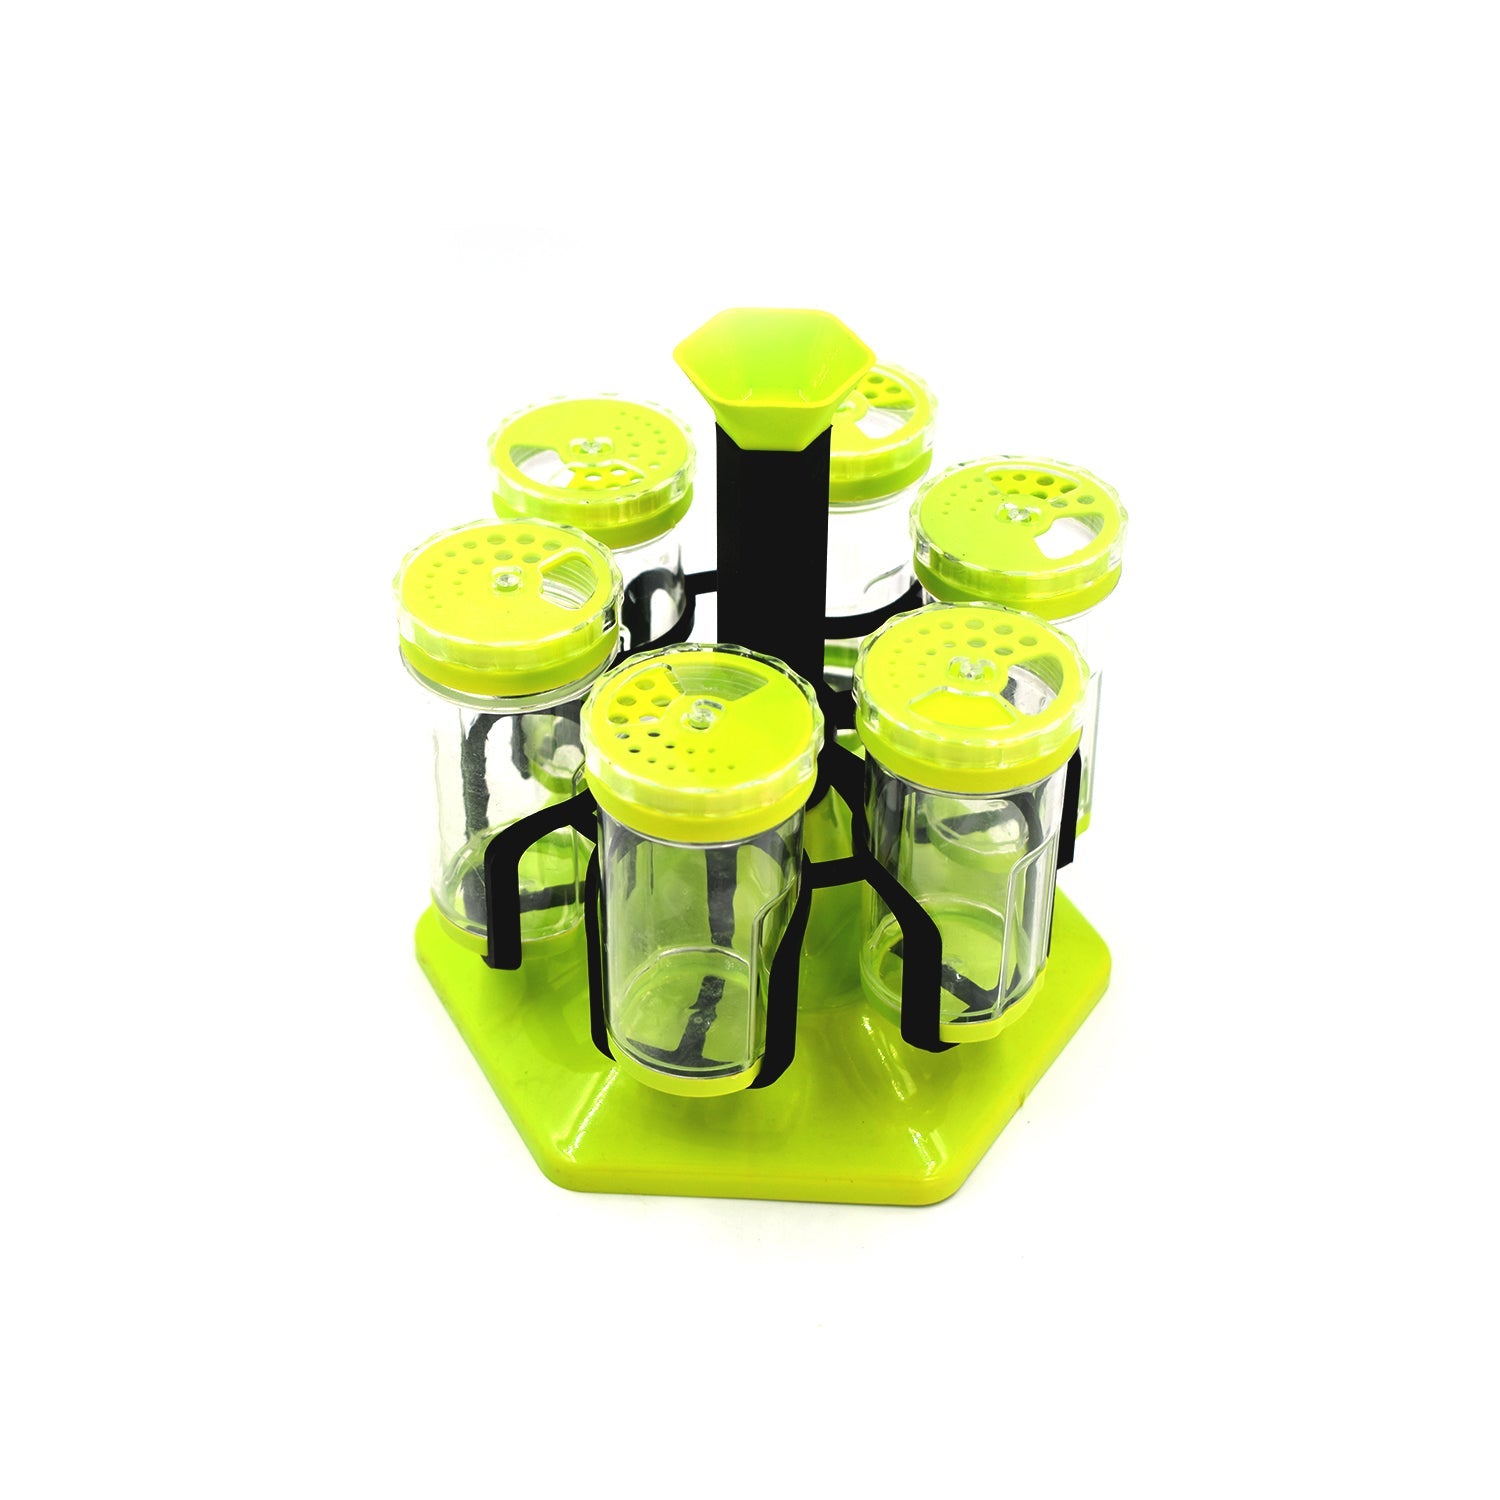 2876 Multipurpose Masala/Spice Rack Container (Pack of 6) DeoDap